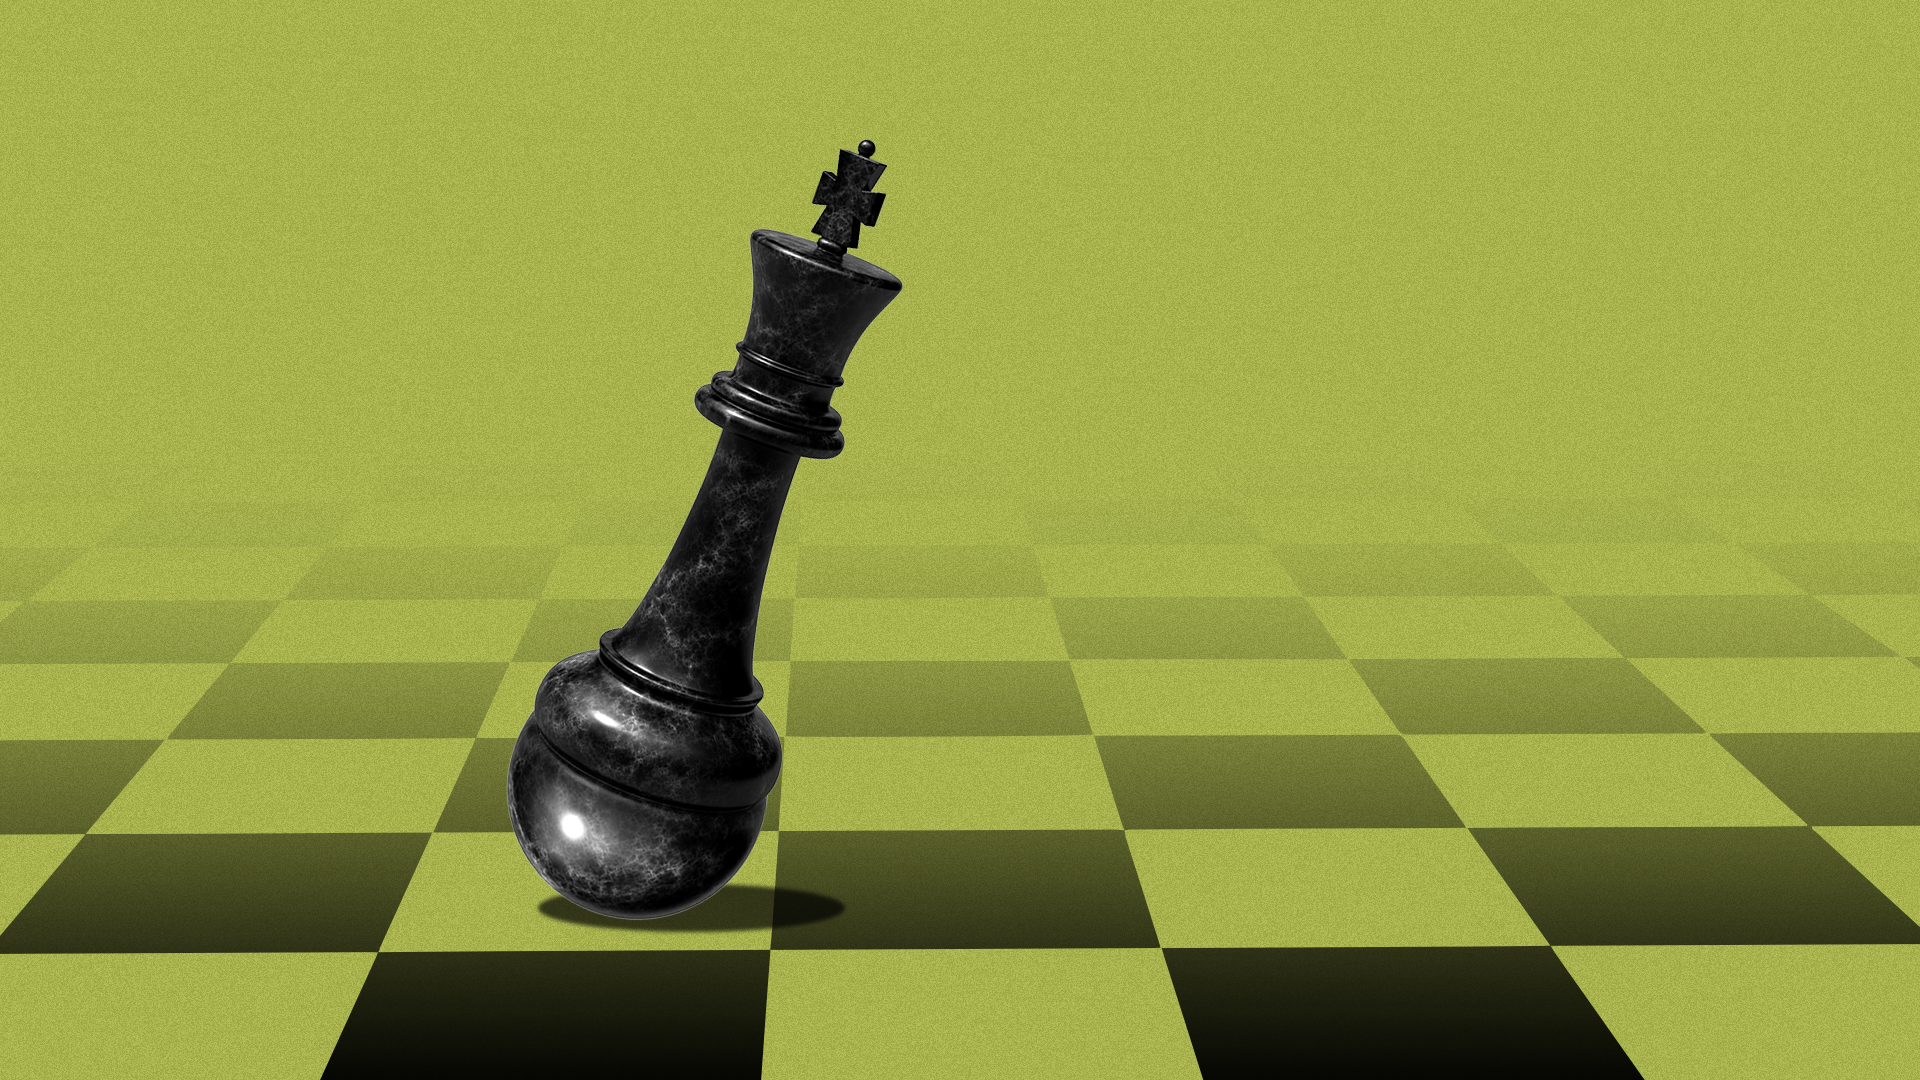 Chess's Governing Body Delays Report on Cheating Scandal - The New